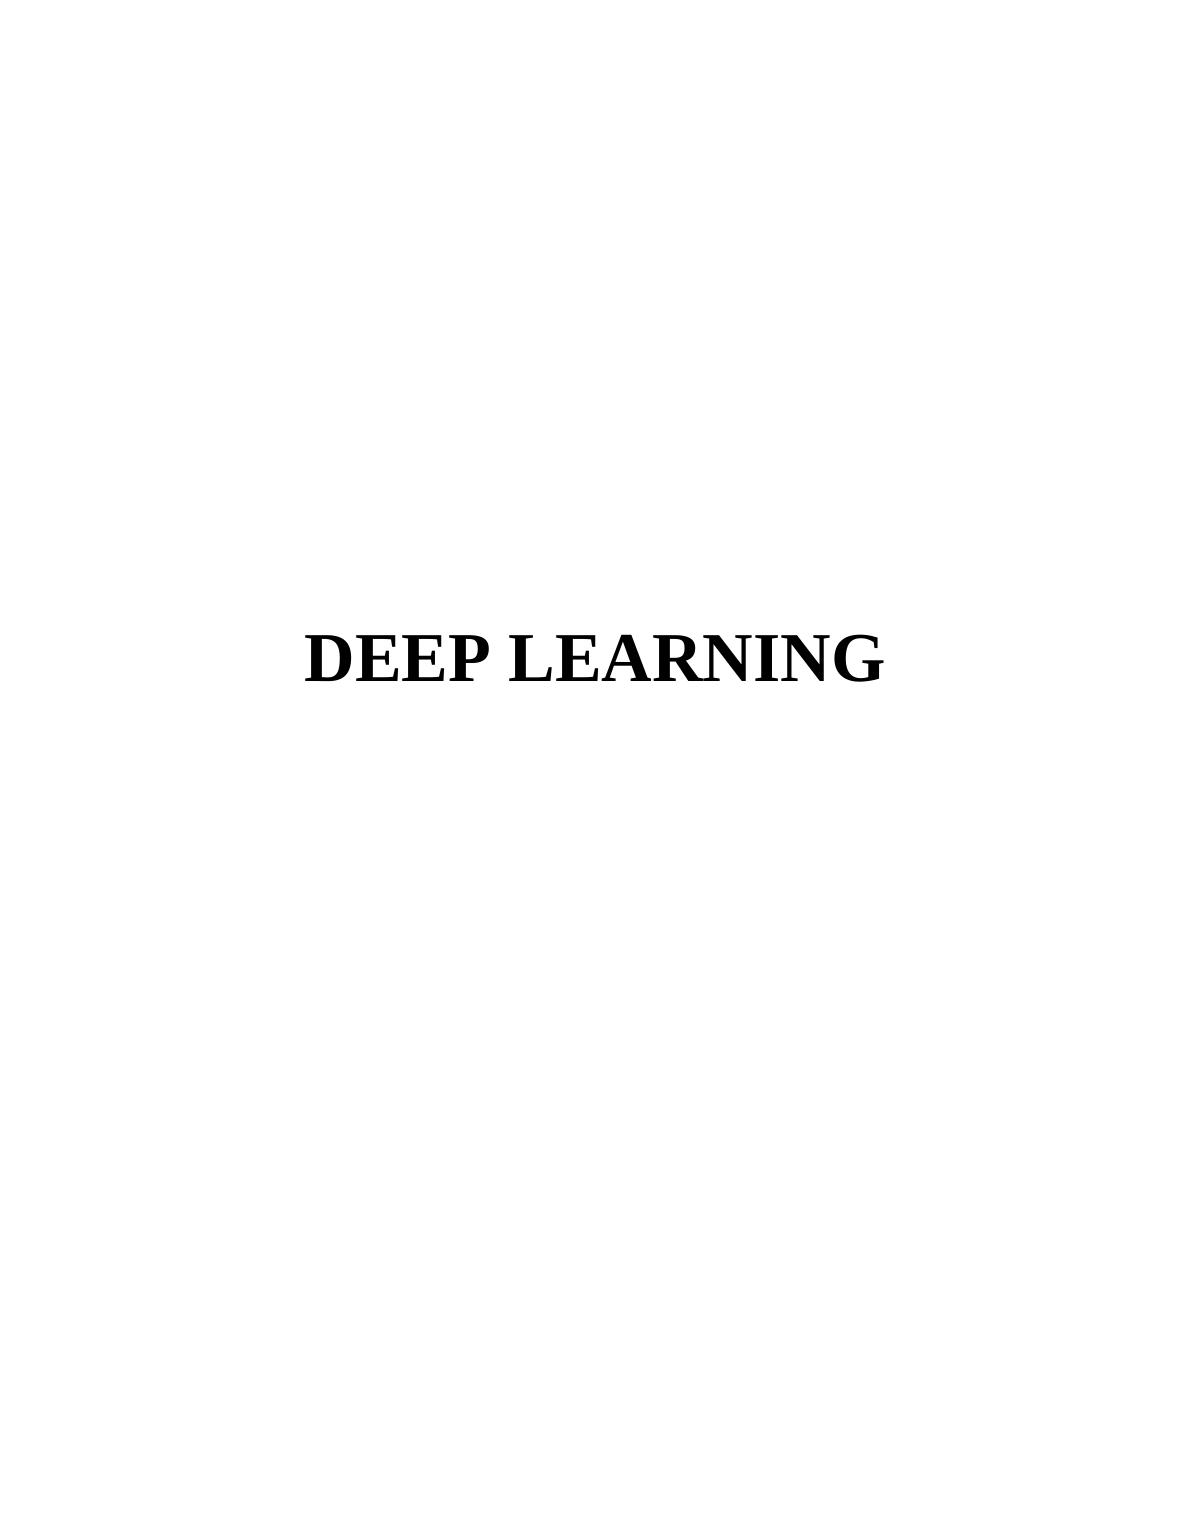 Deep Learning: Importance and Development_1